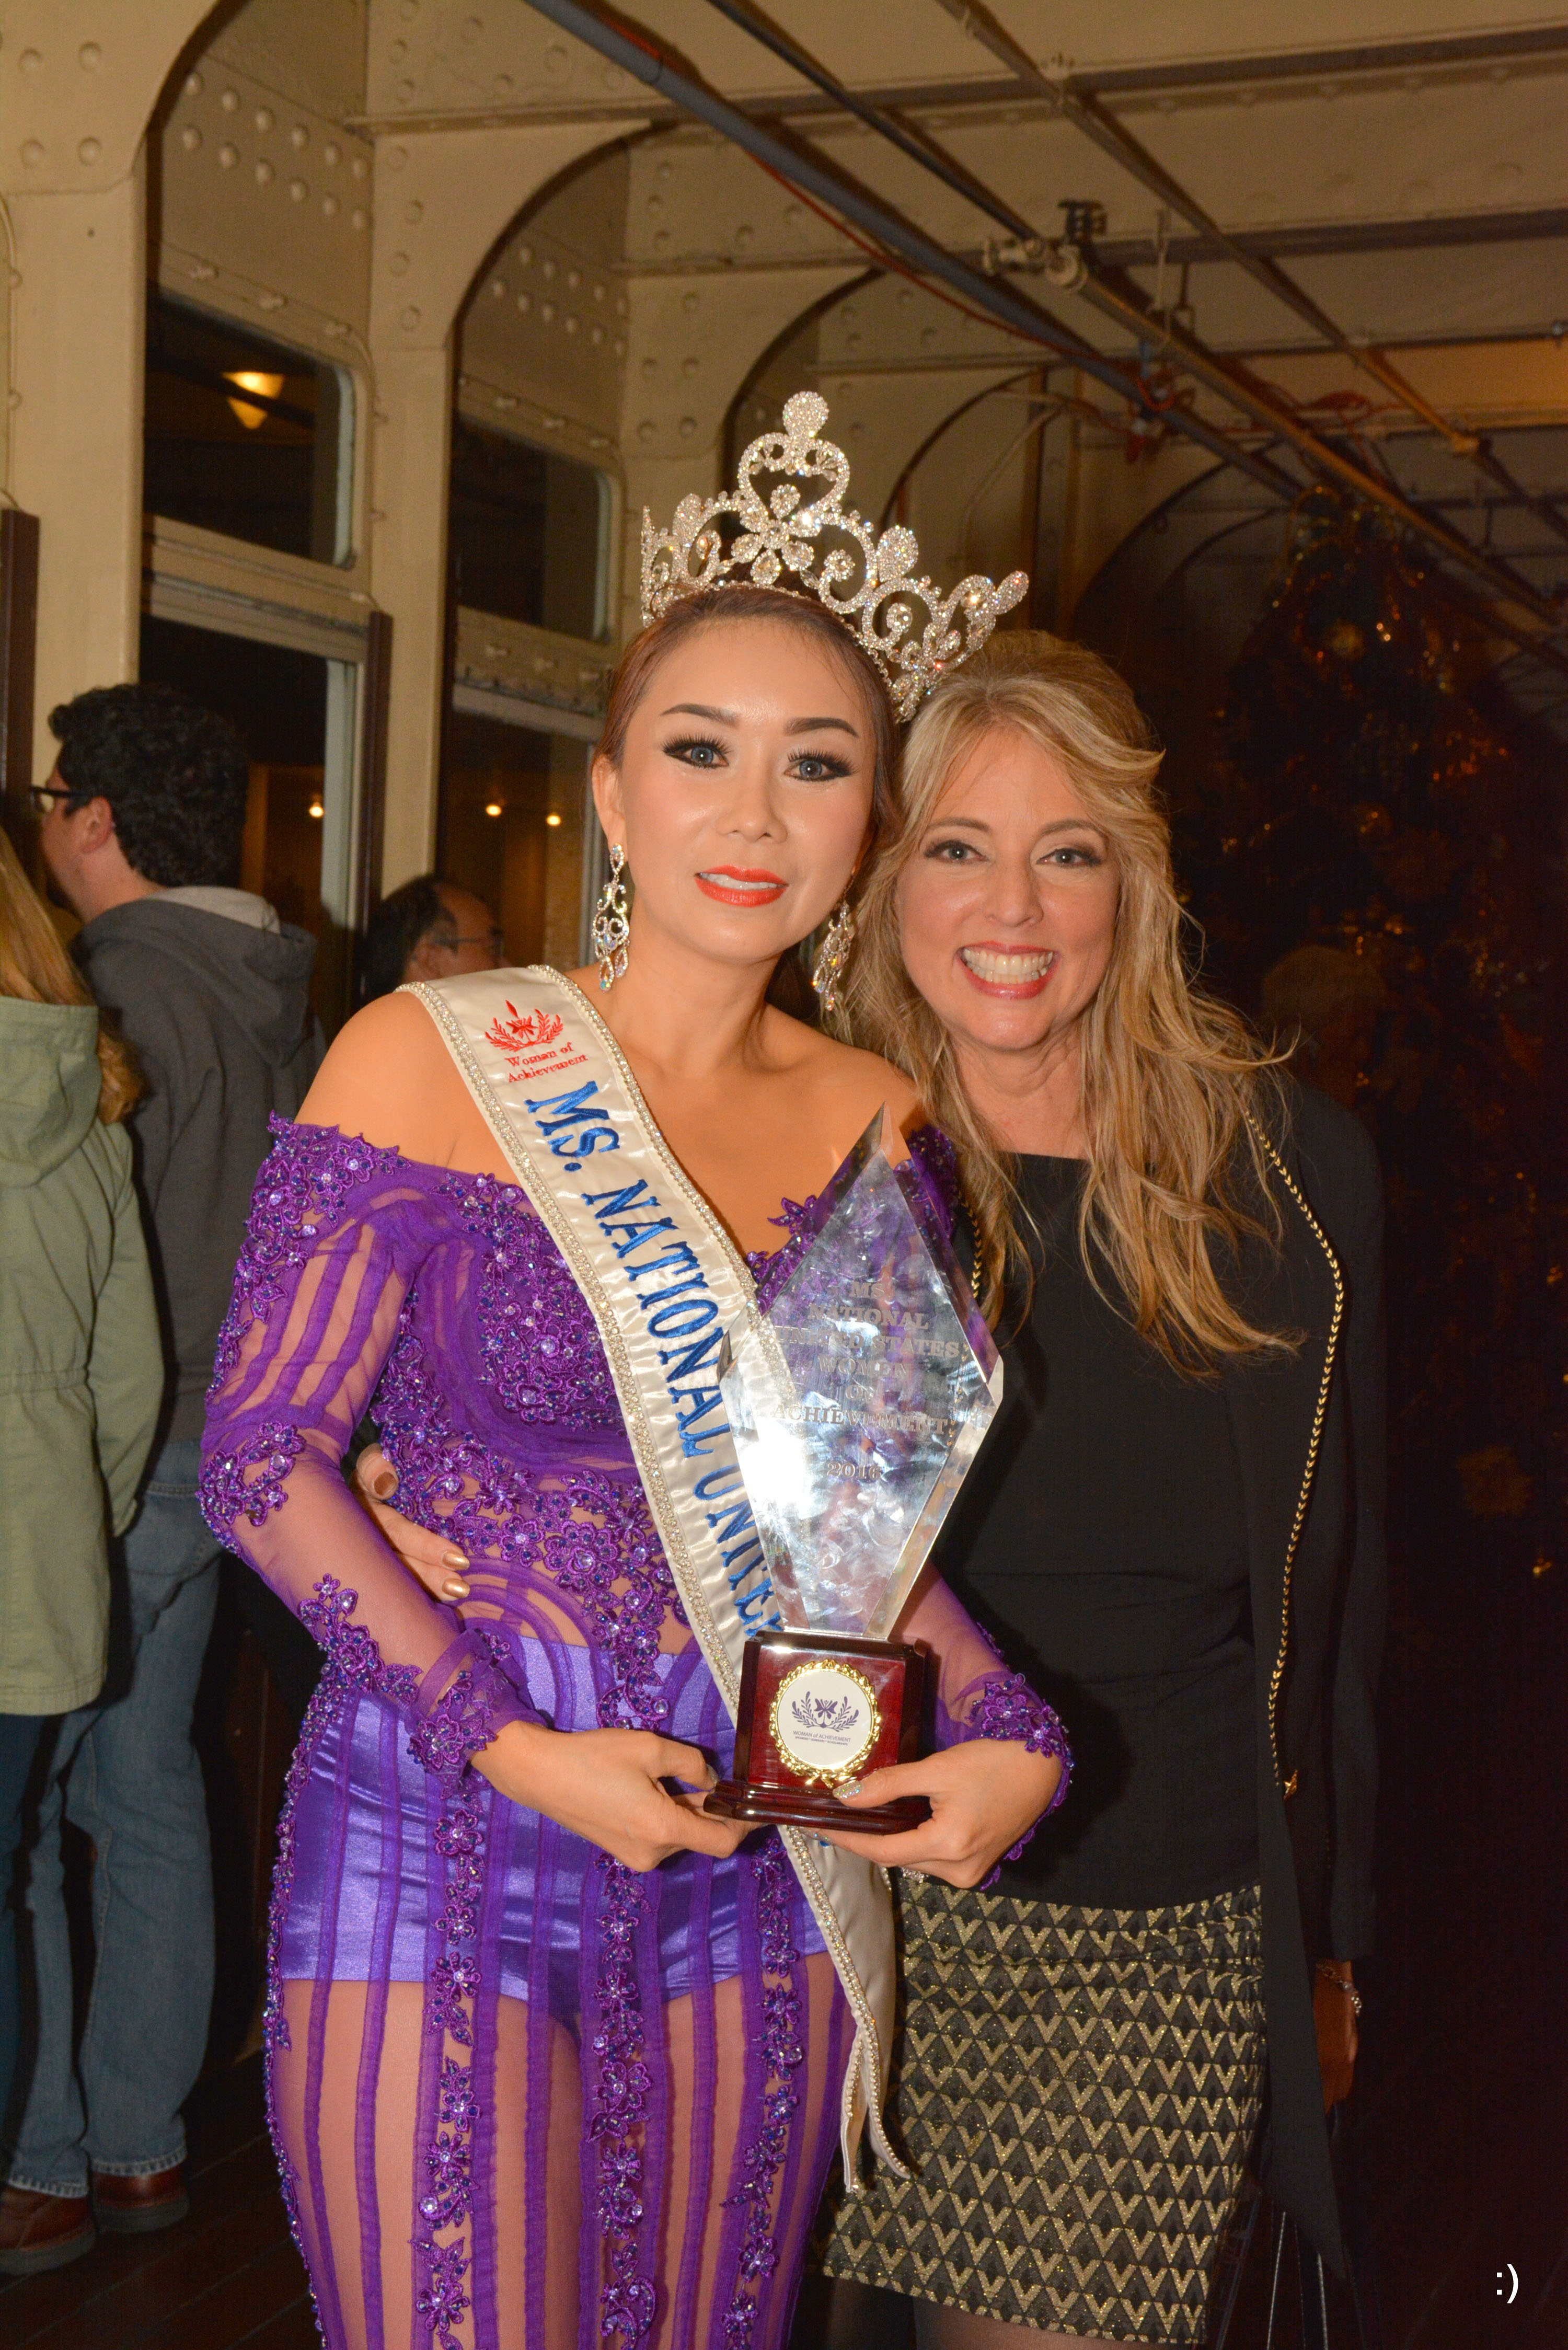 Sam Nguyen-Di Ai Hong Sam, Ms. National United States Woman of Achievement 2016 and Marlena Martin, Founder of the Annual National United States Woman of Achievement Pageant